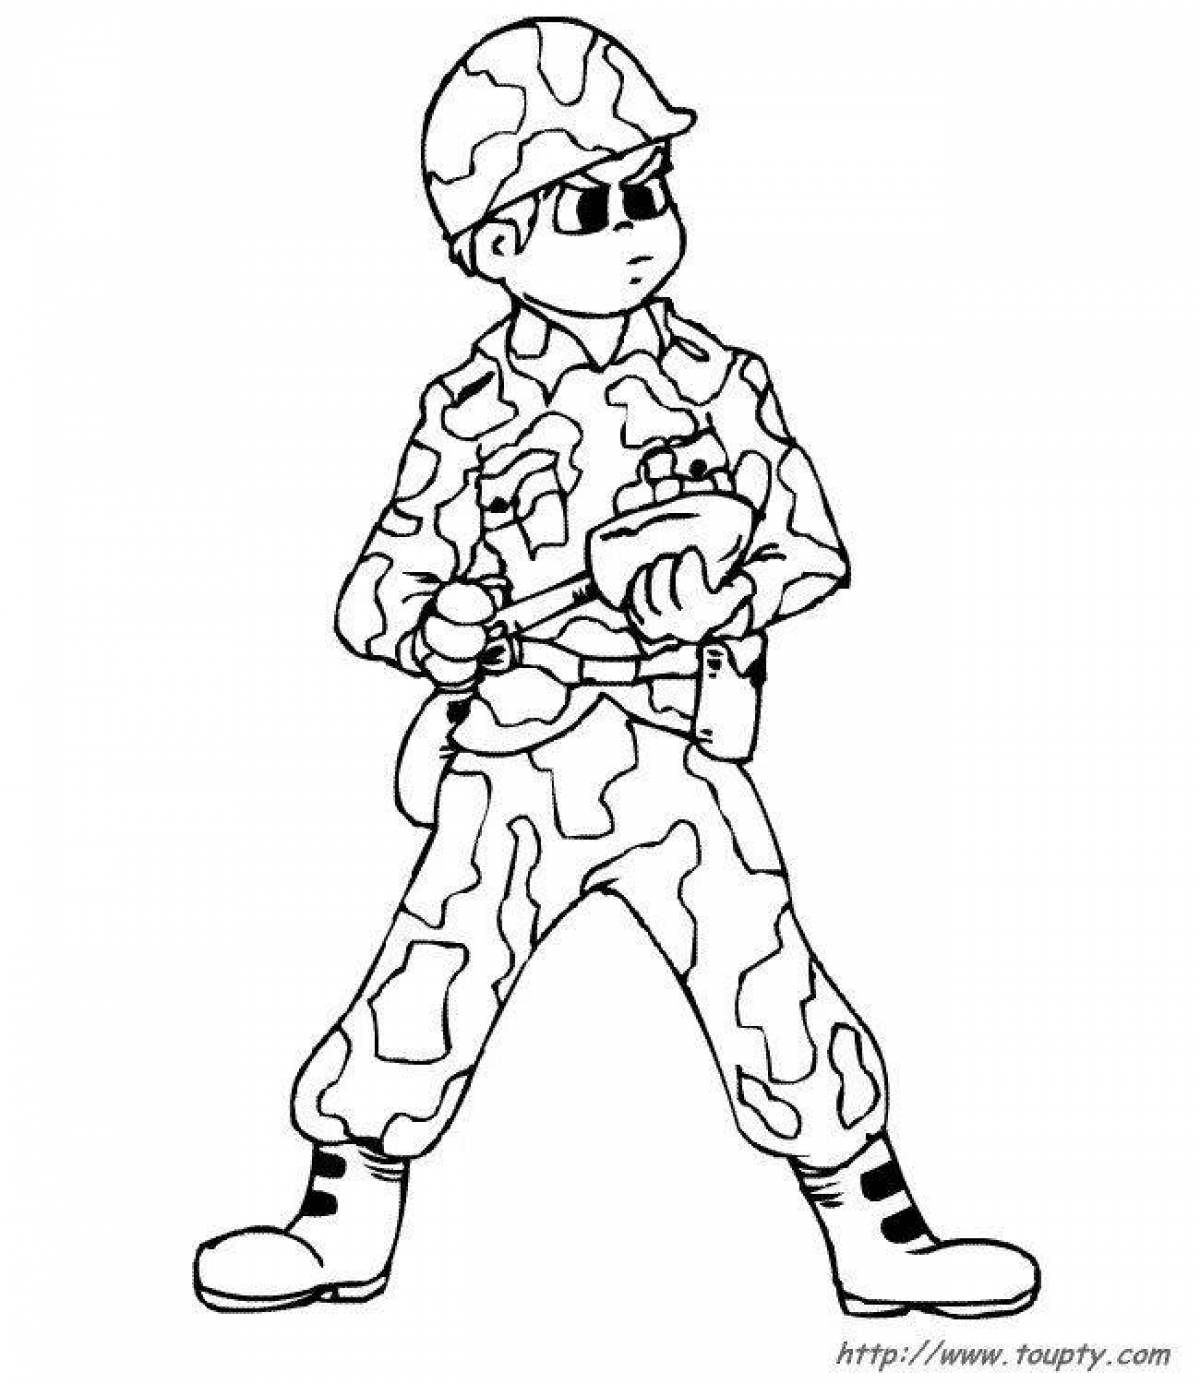 Coloring book distinctive soldier pattern